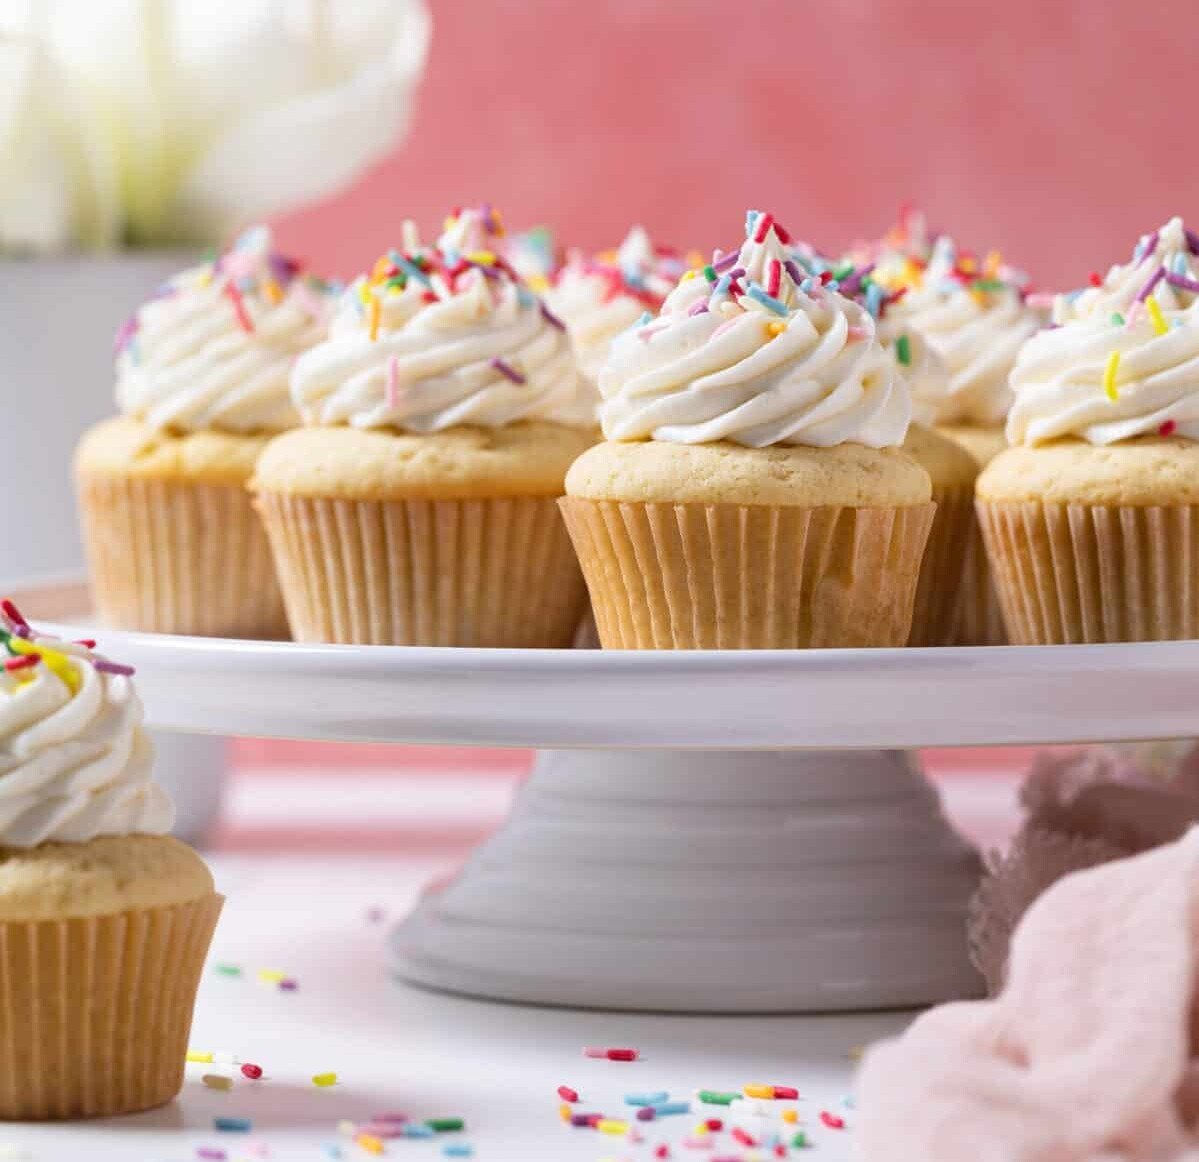 https://www.orchidsandsweettea.com/wp-content/uploads/2019/04/Vanilla-Sprinkled-Cupcakes-10-of-11-scaled-e1690409876530.jpg